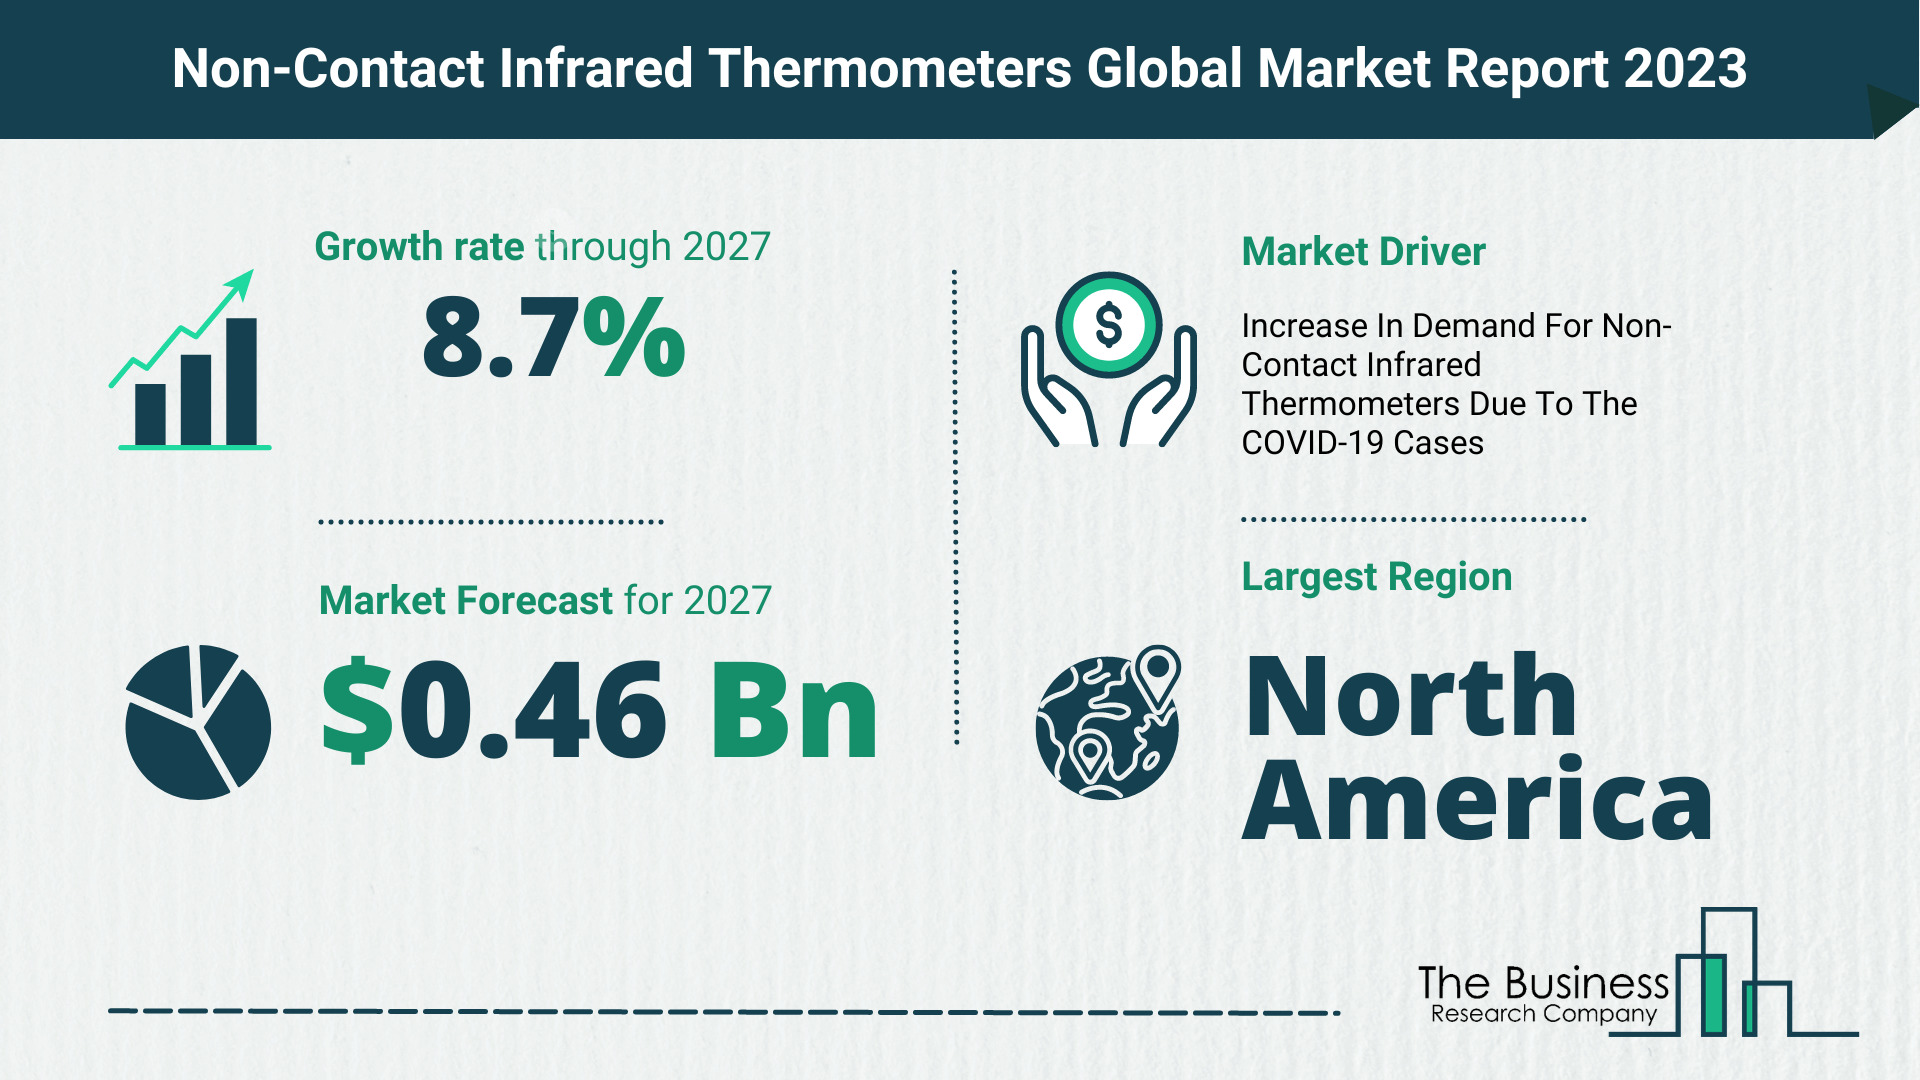 Global Non-Contact Infrared Thermometers Market